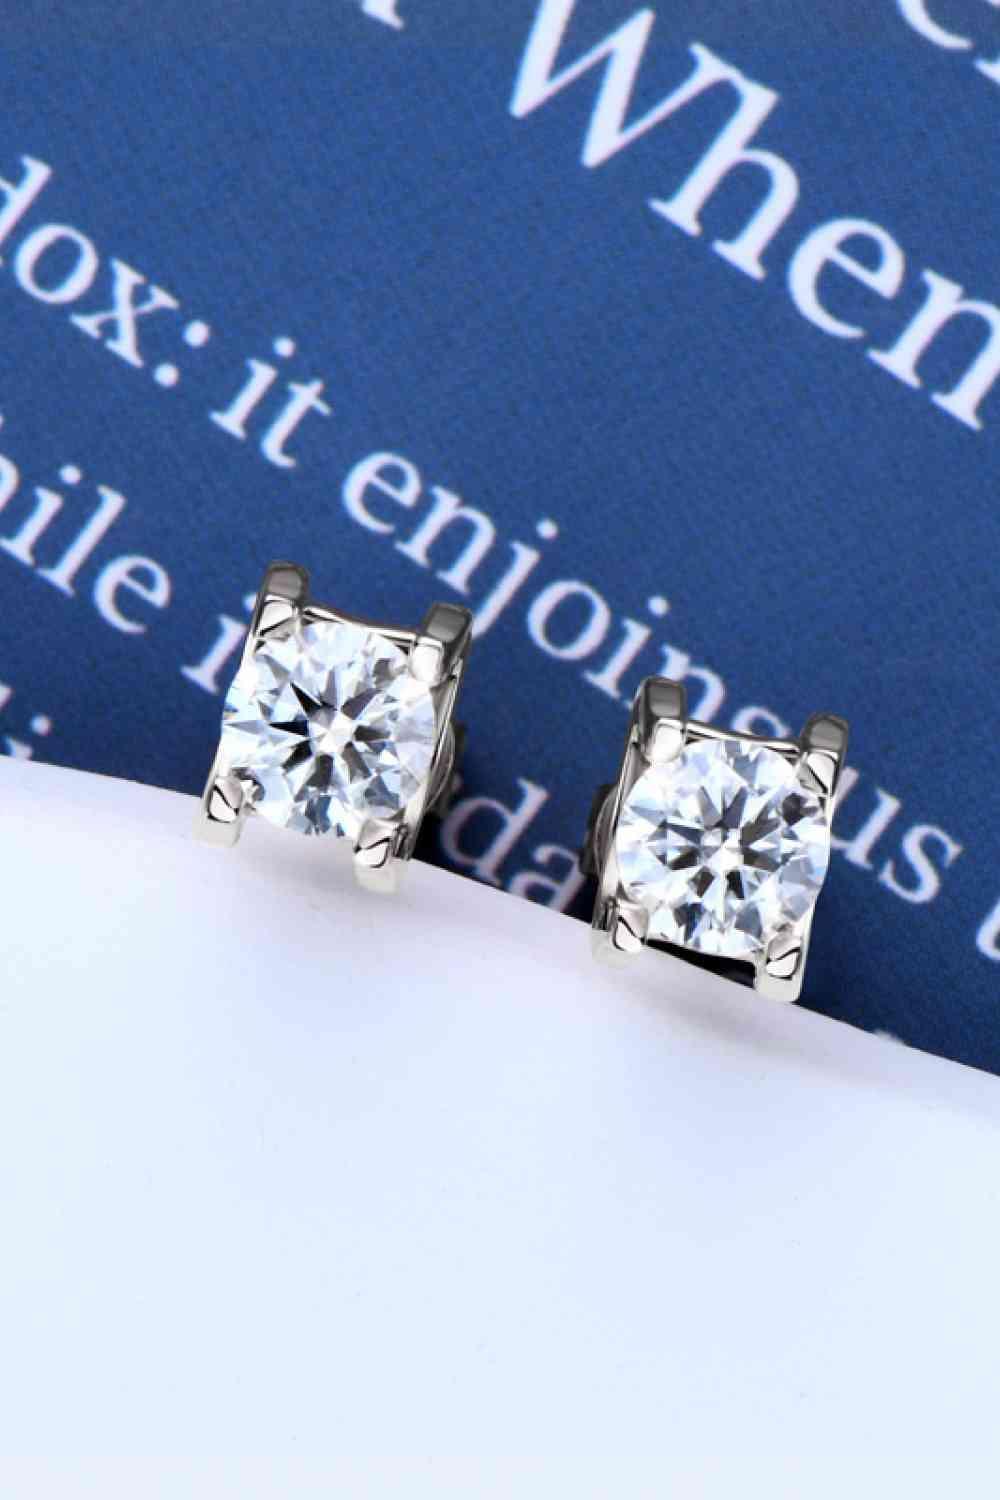 a pair of diamond earrings sitting on top of a book